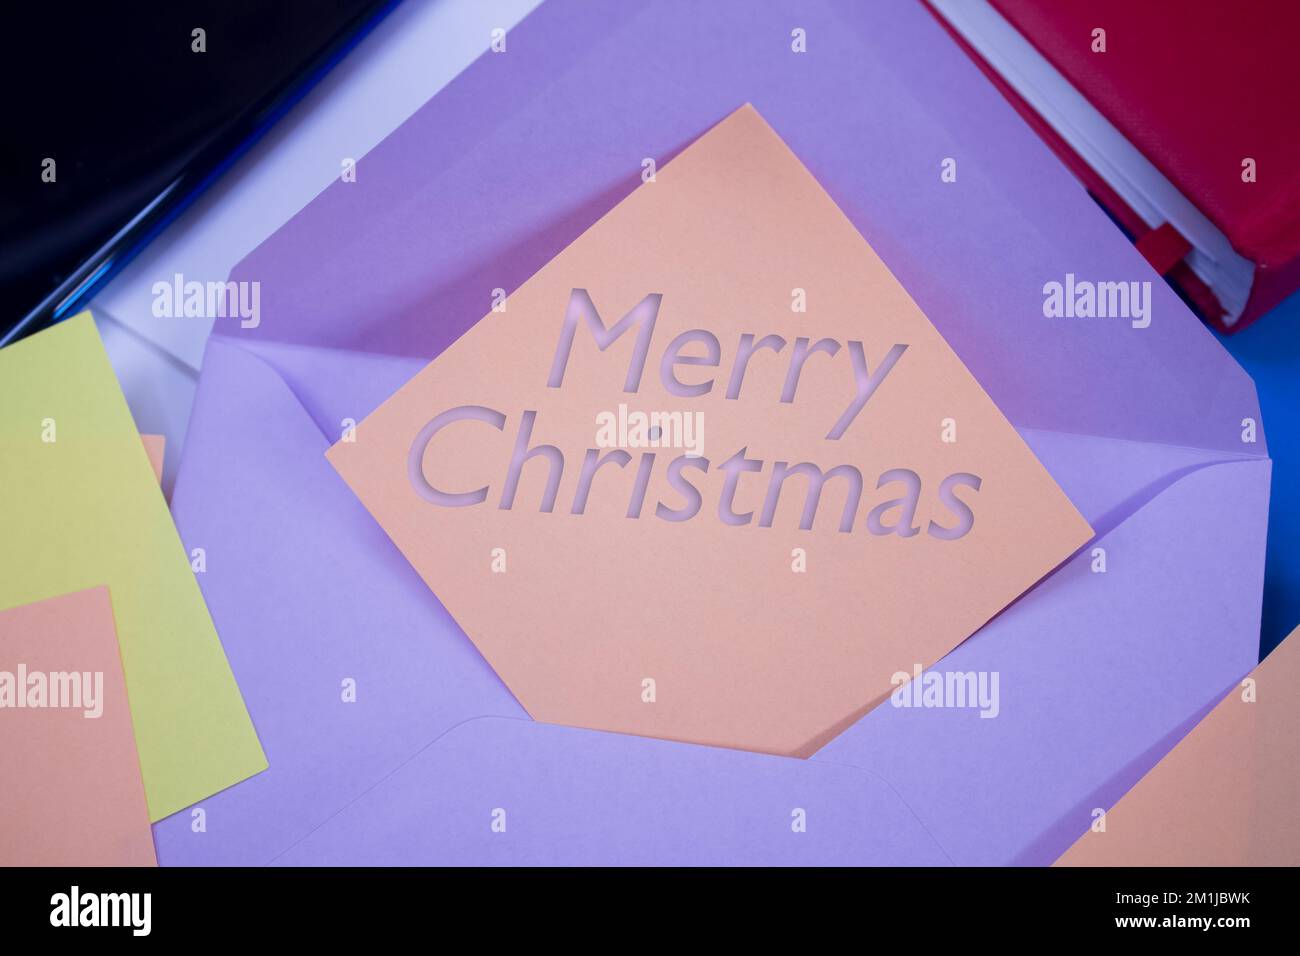 Merry Christmas. Text on adhesive note paper. Event, celebration reminder message. Stock Photo